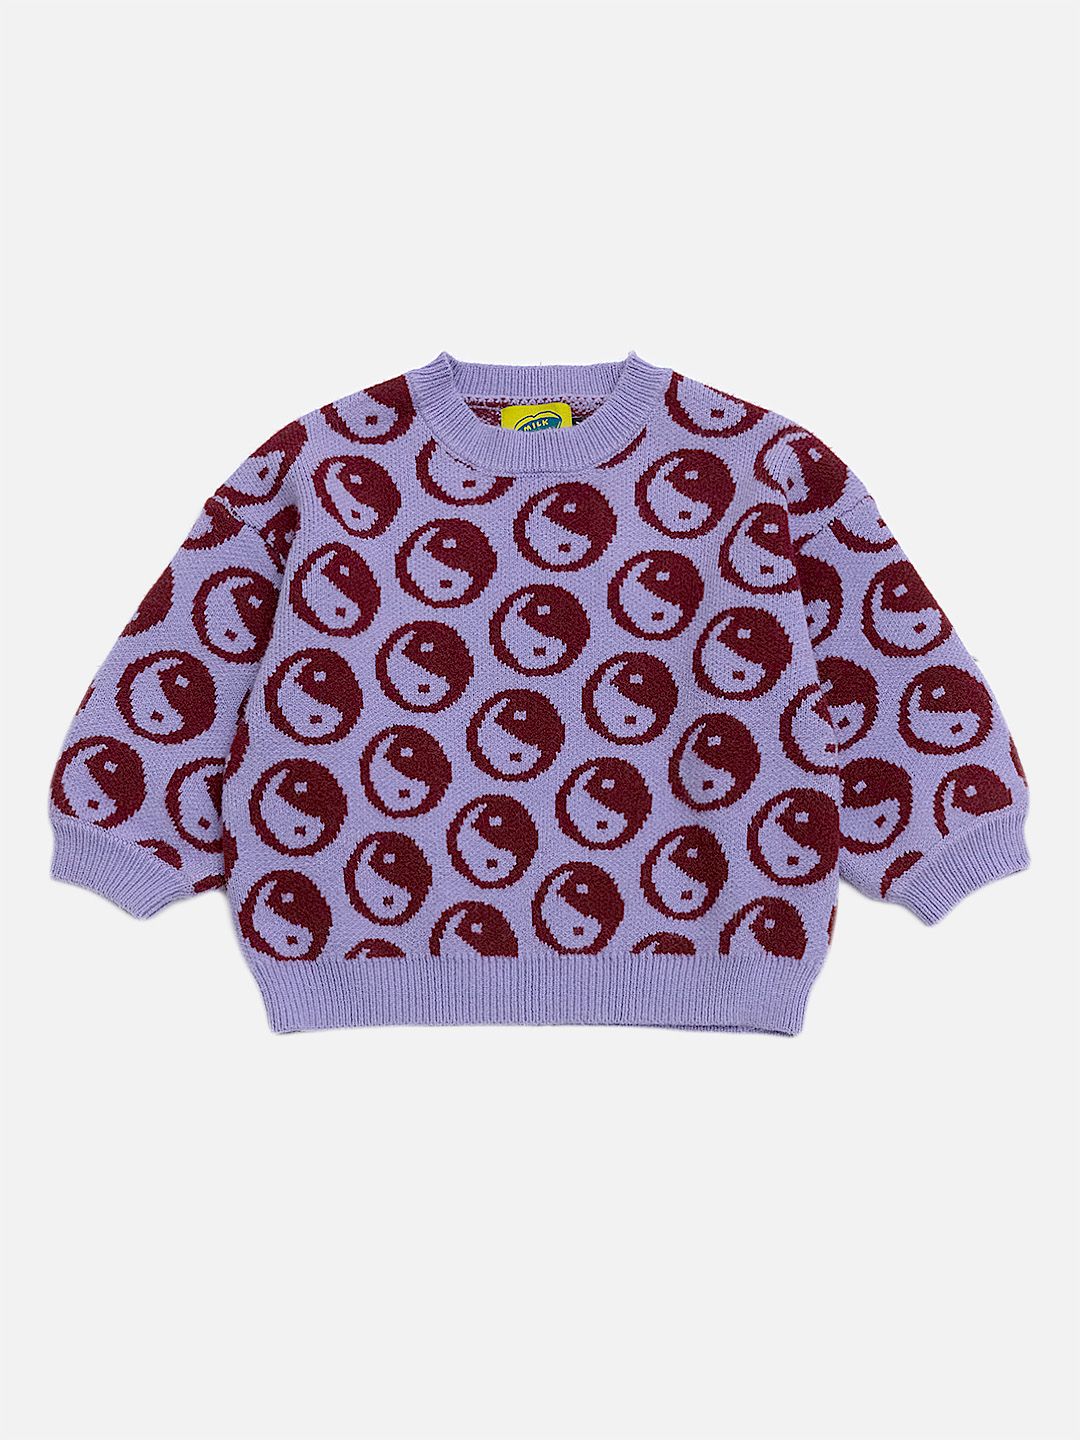 Violet | A kids' sweater with dark red yin and yang circles on a violet background, front view